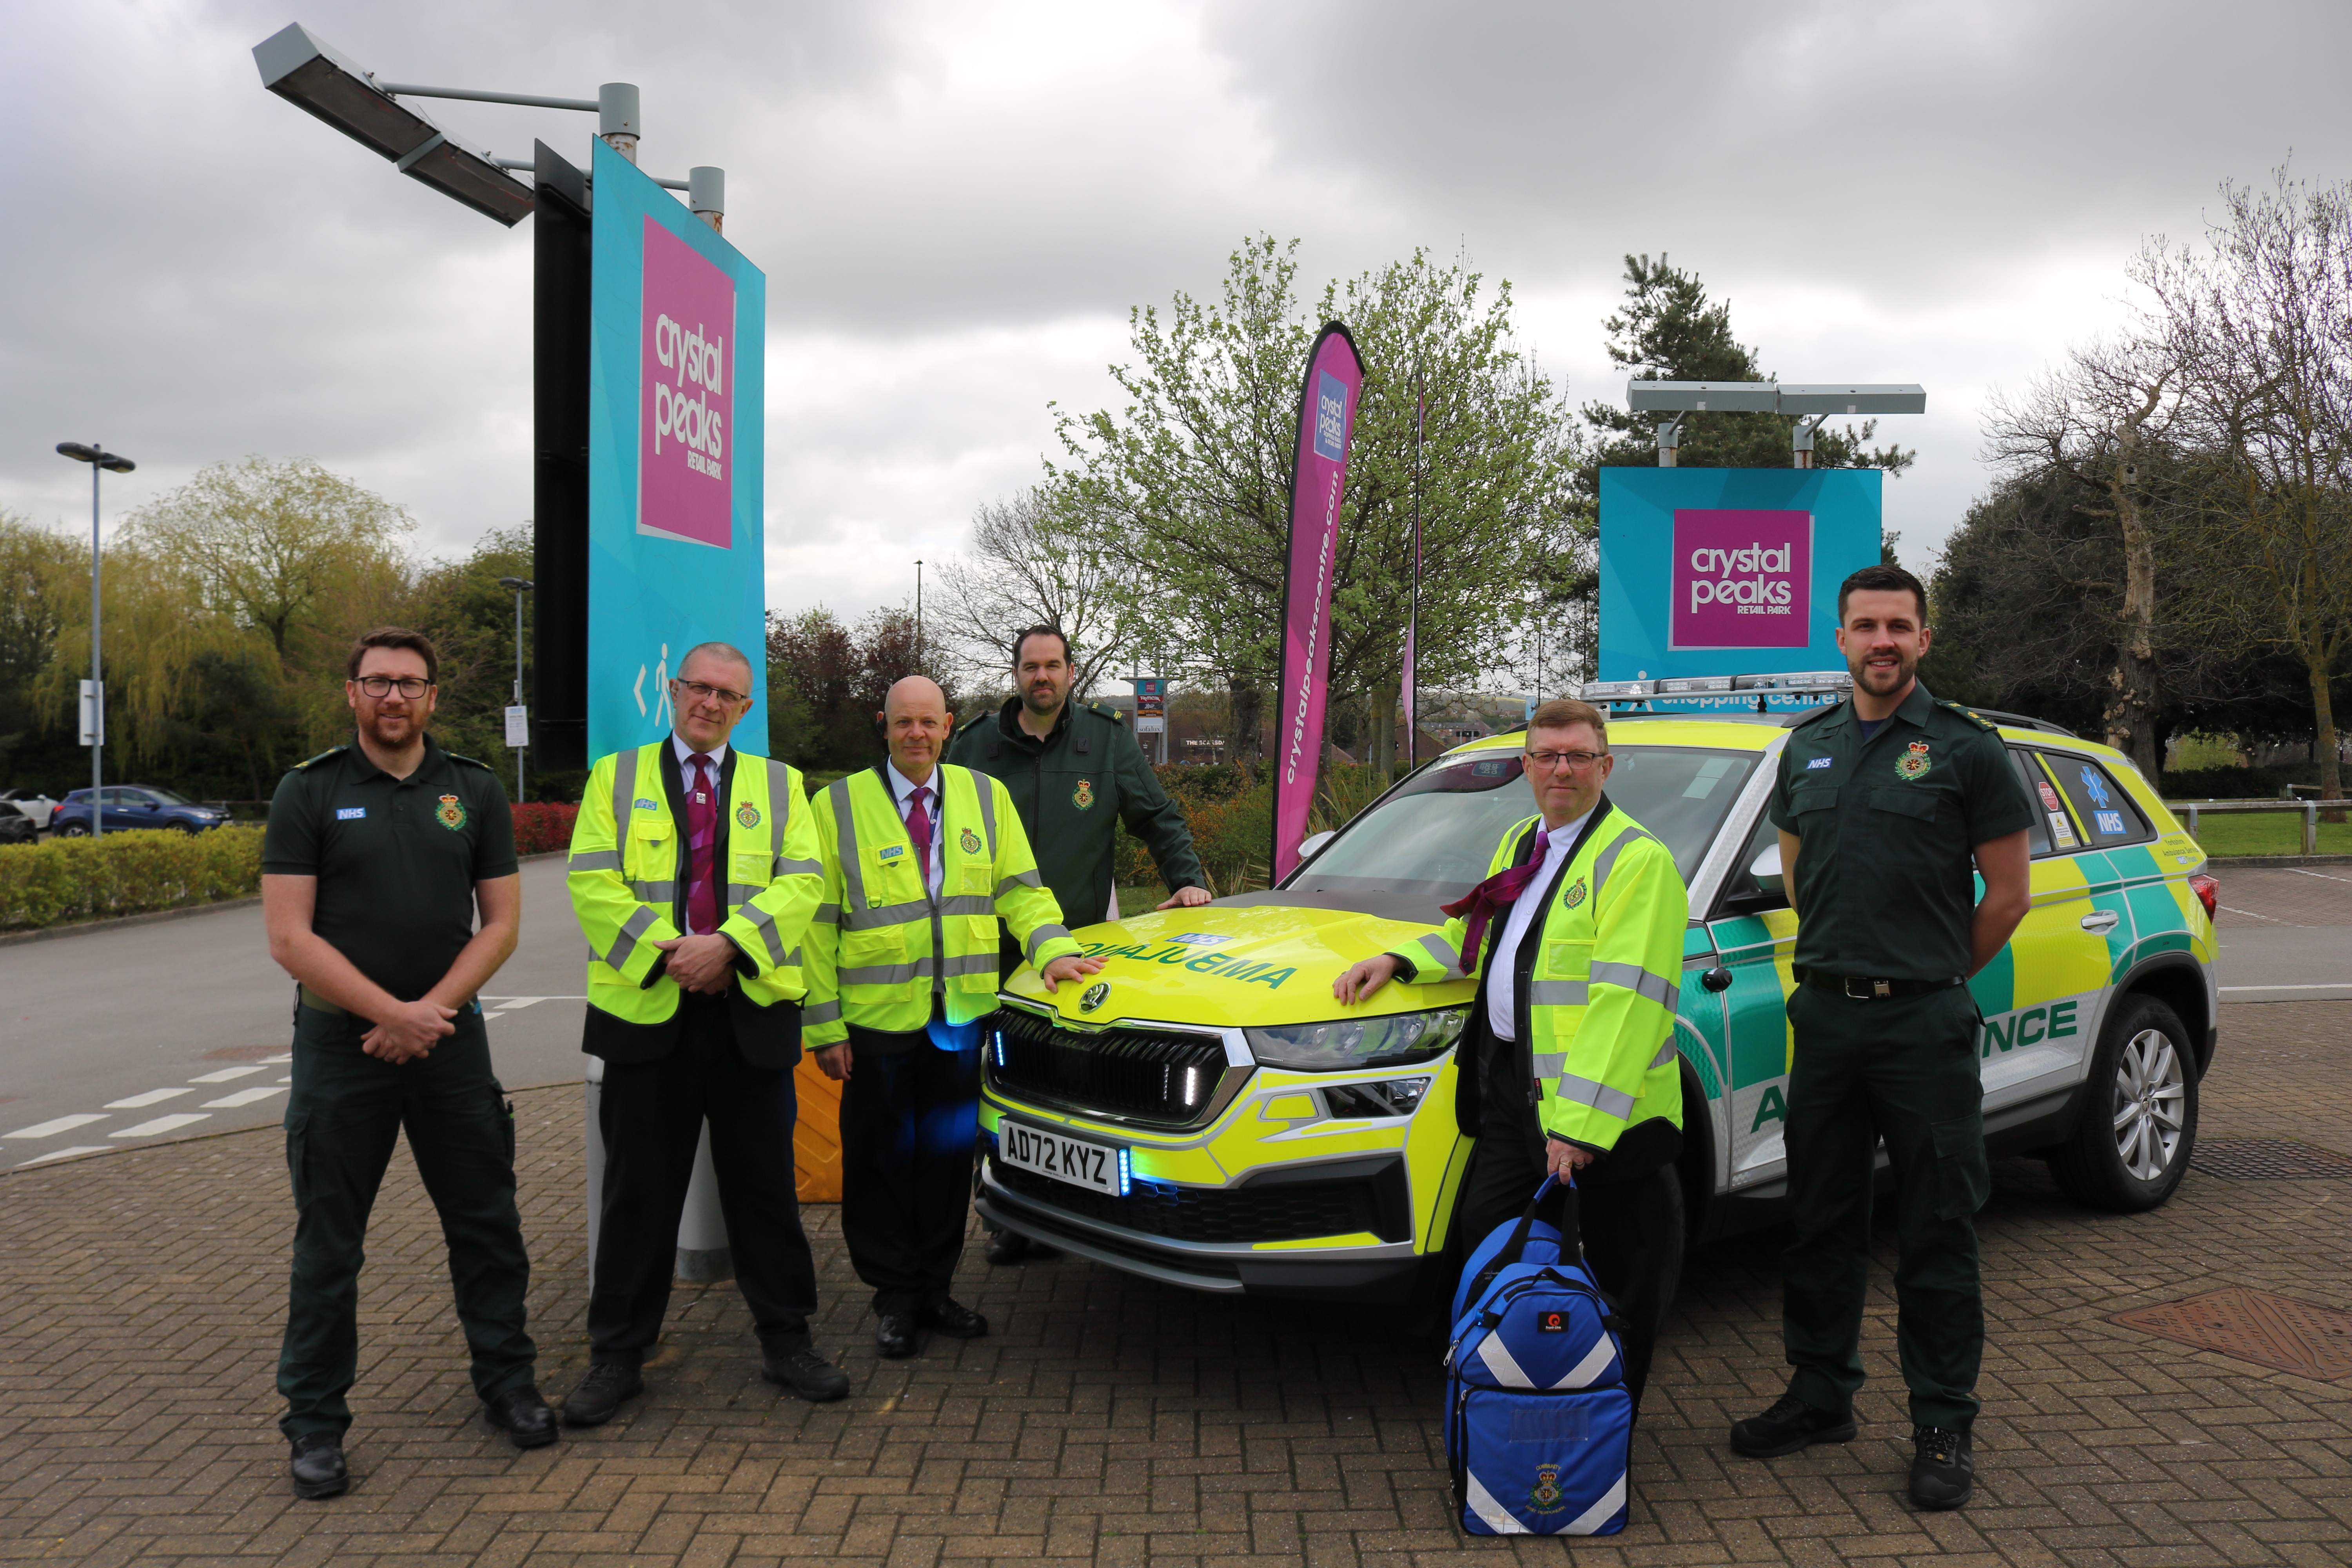 Yorkshire Ambulance Service Staff and Volunteers in uniform, stood with a Rapid Response Vehicle at Crystal Peaks, Sheffield